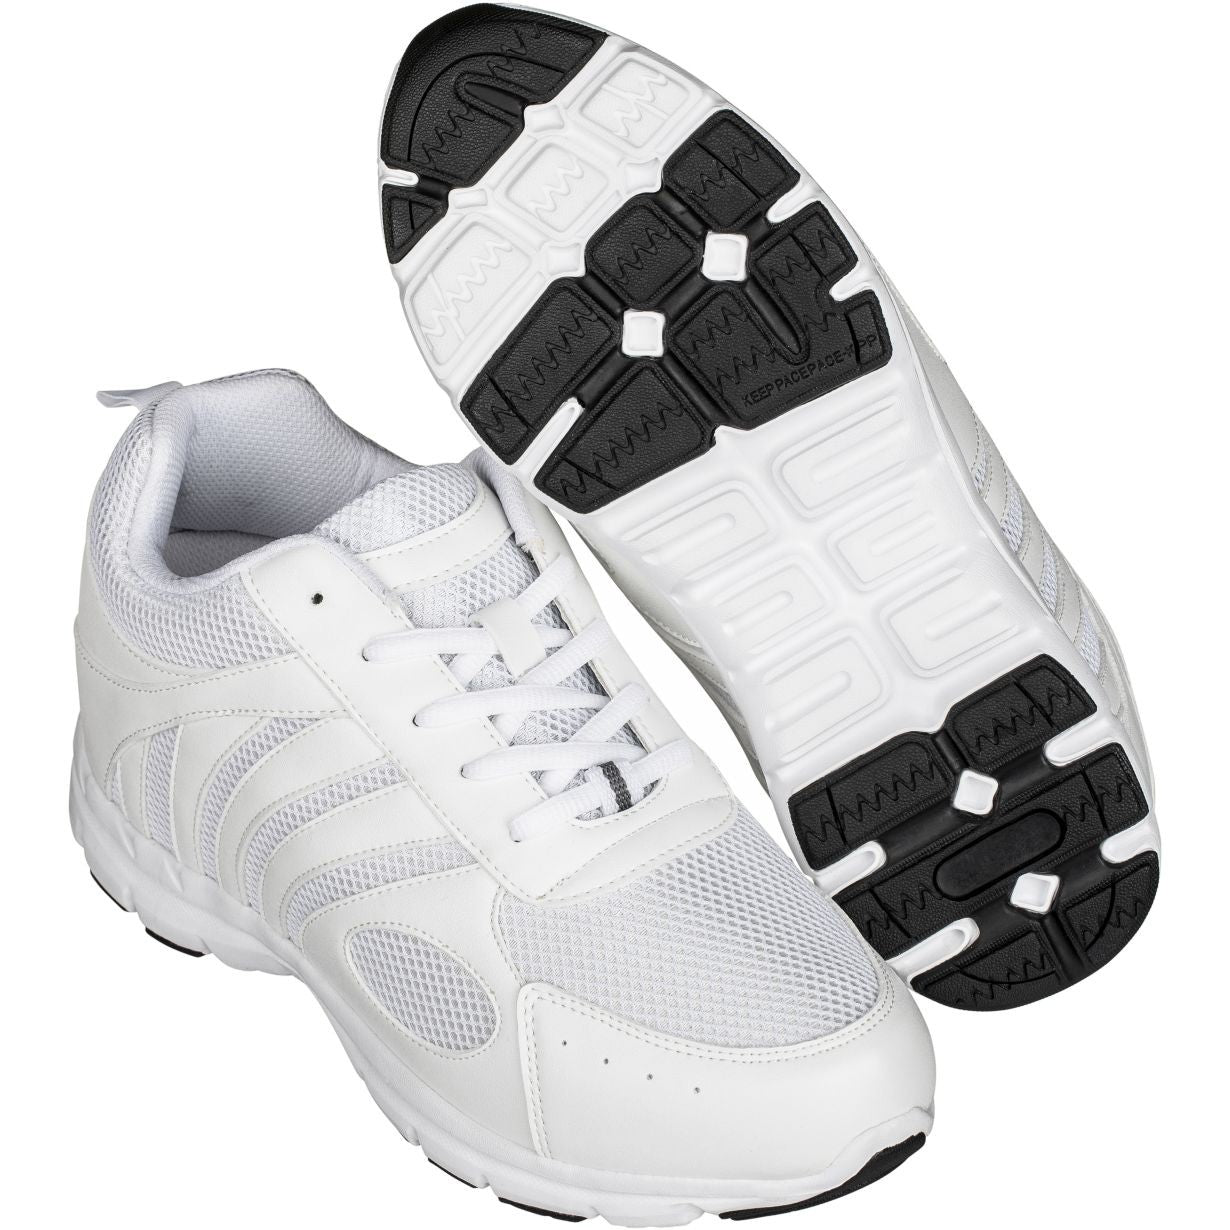 Elevator shoes height increase CALTO Light White Elevator Sneakers - Three Inches - G3303